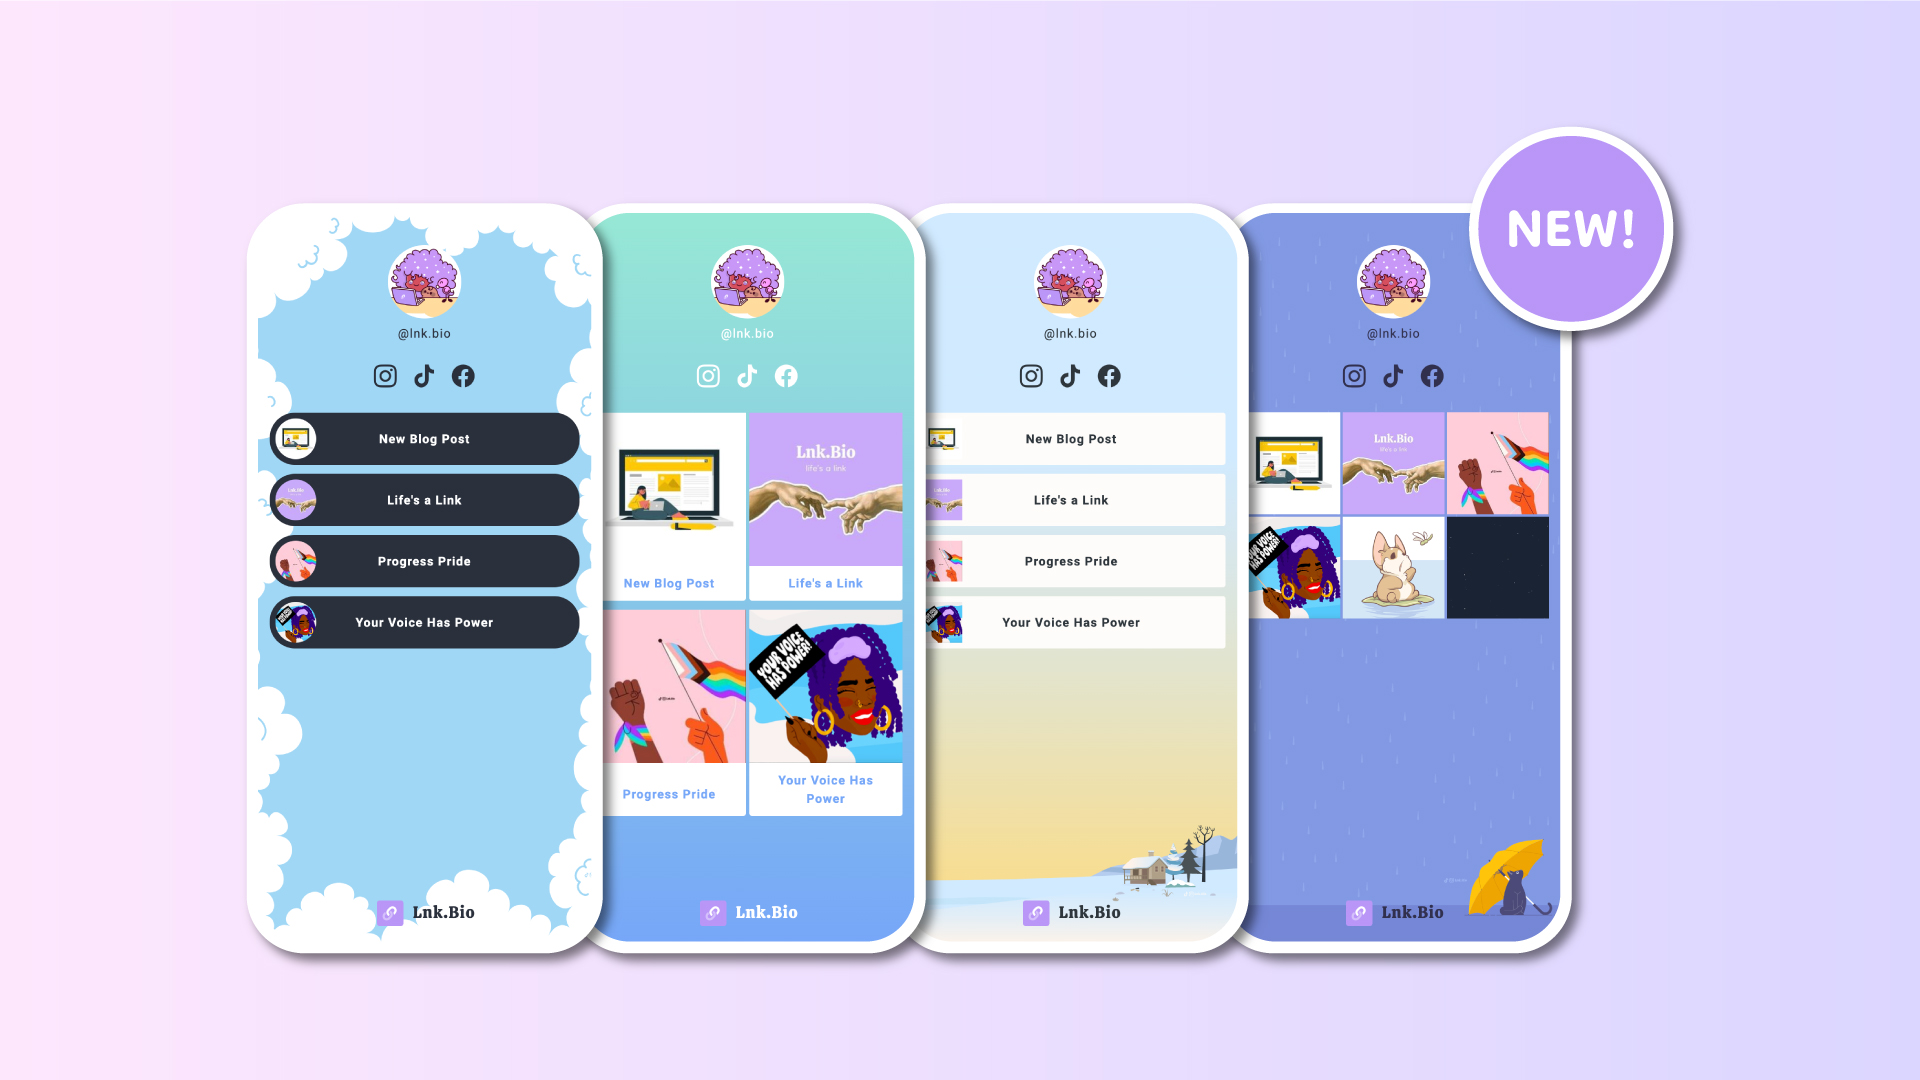 16 New Awesome Themes! 🎨